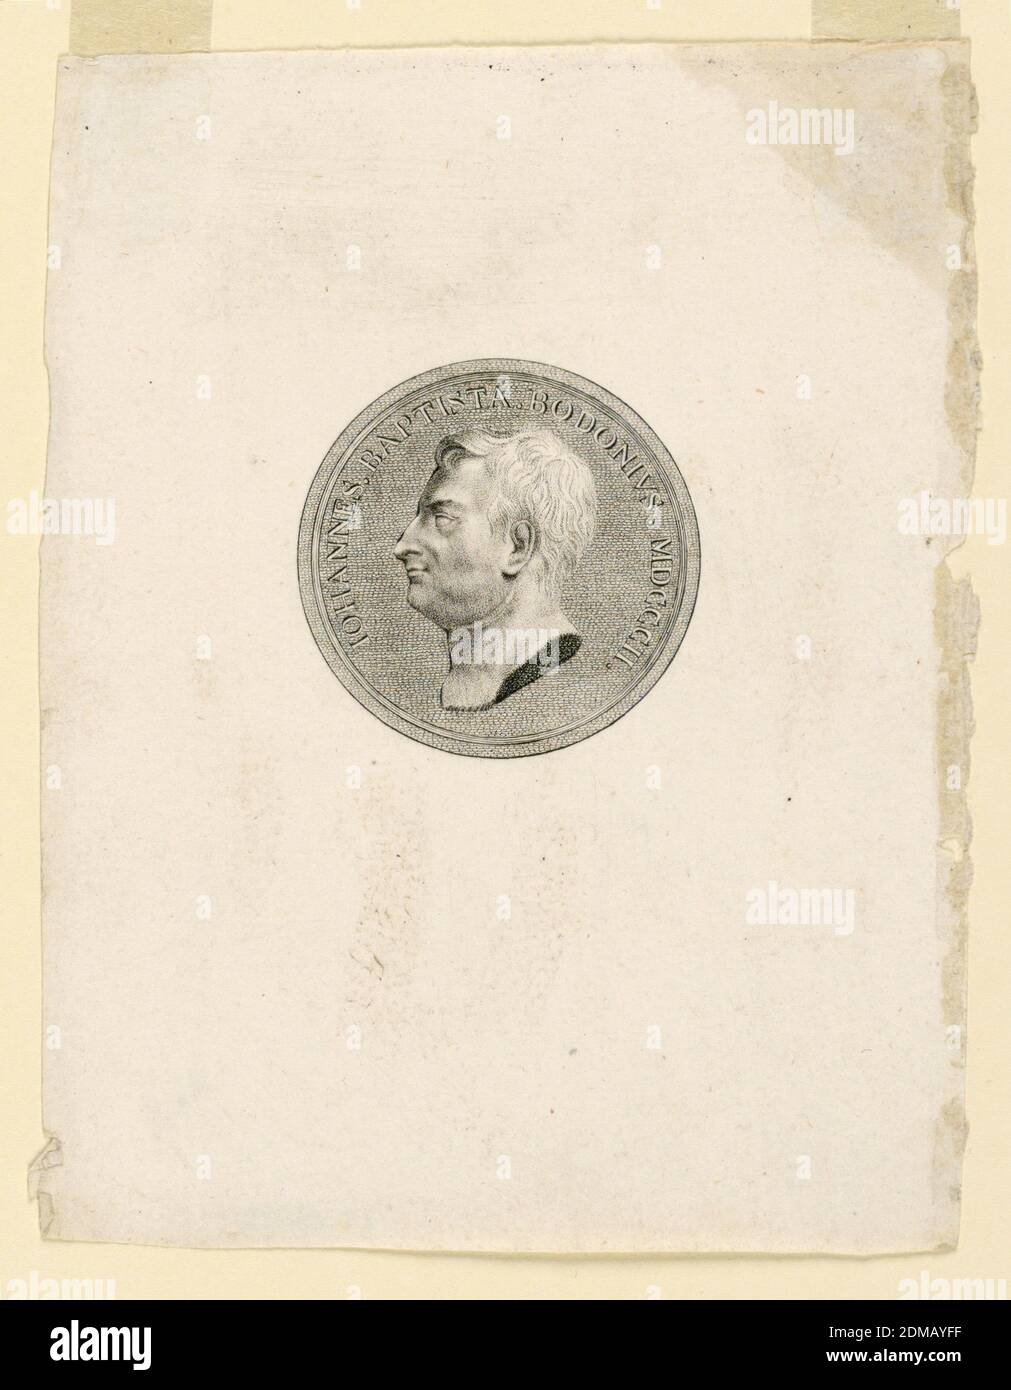 Portrait of Giambattista Bodoni (1740-1813), Engraving on paper, Circular portrait of a form of a medal. Depicting the head only. In profile view., Italy, 1802, Print Stock Photo